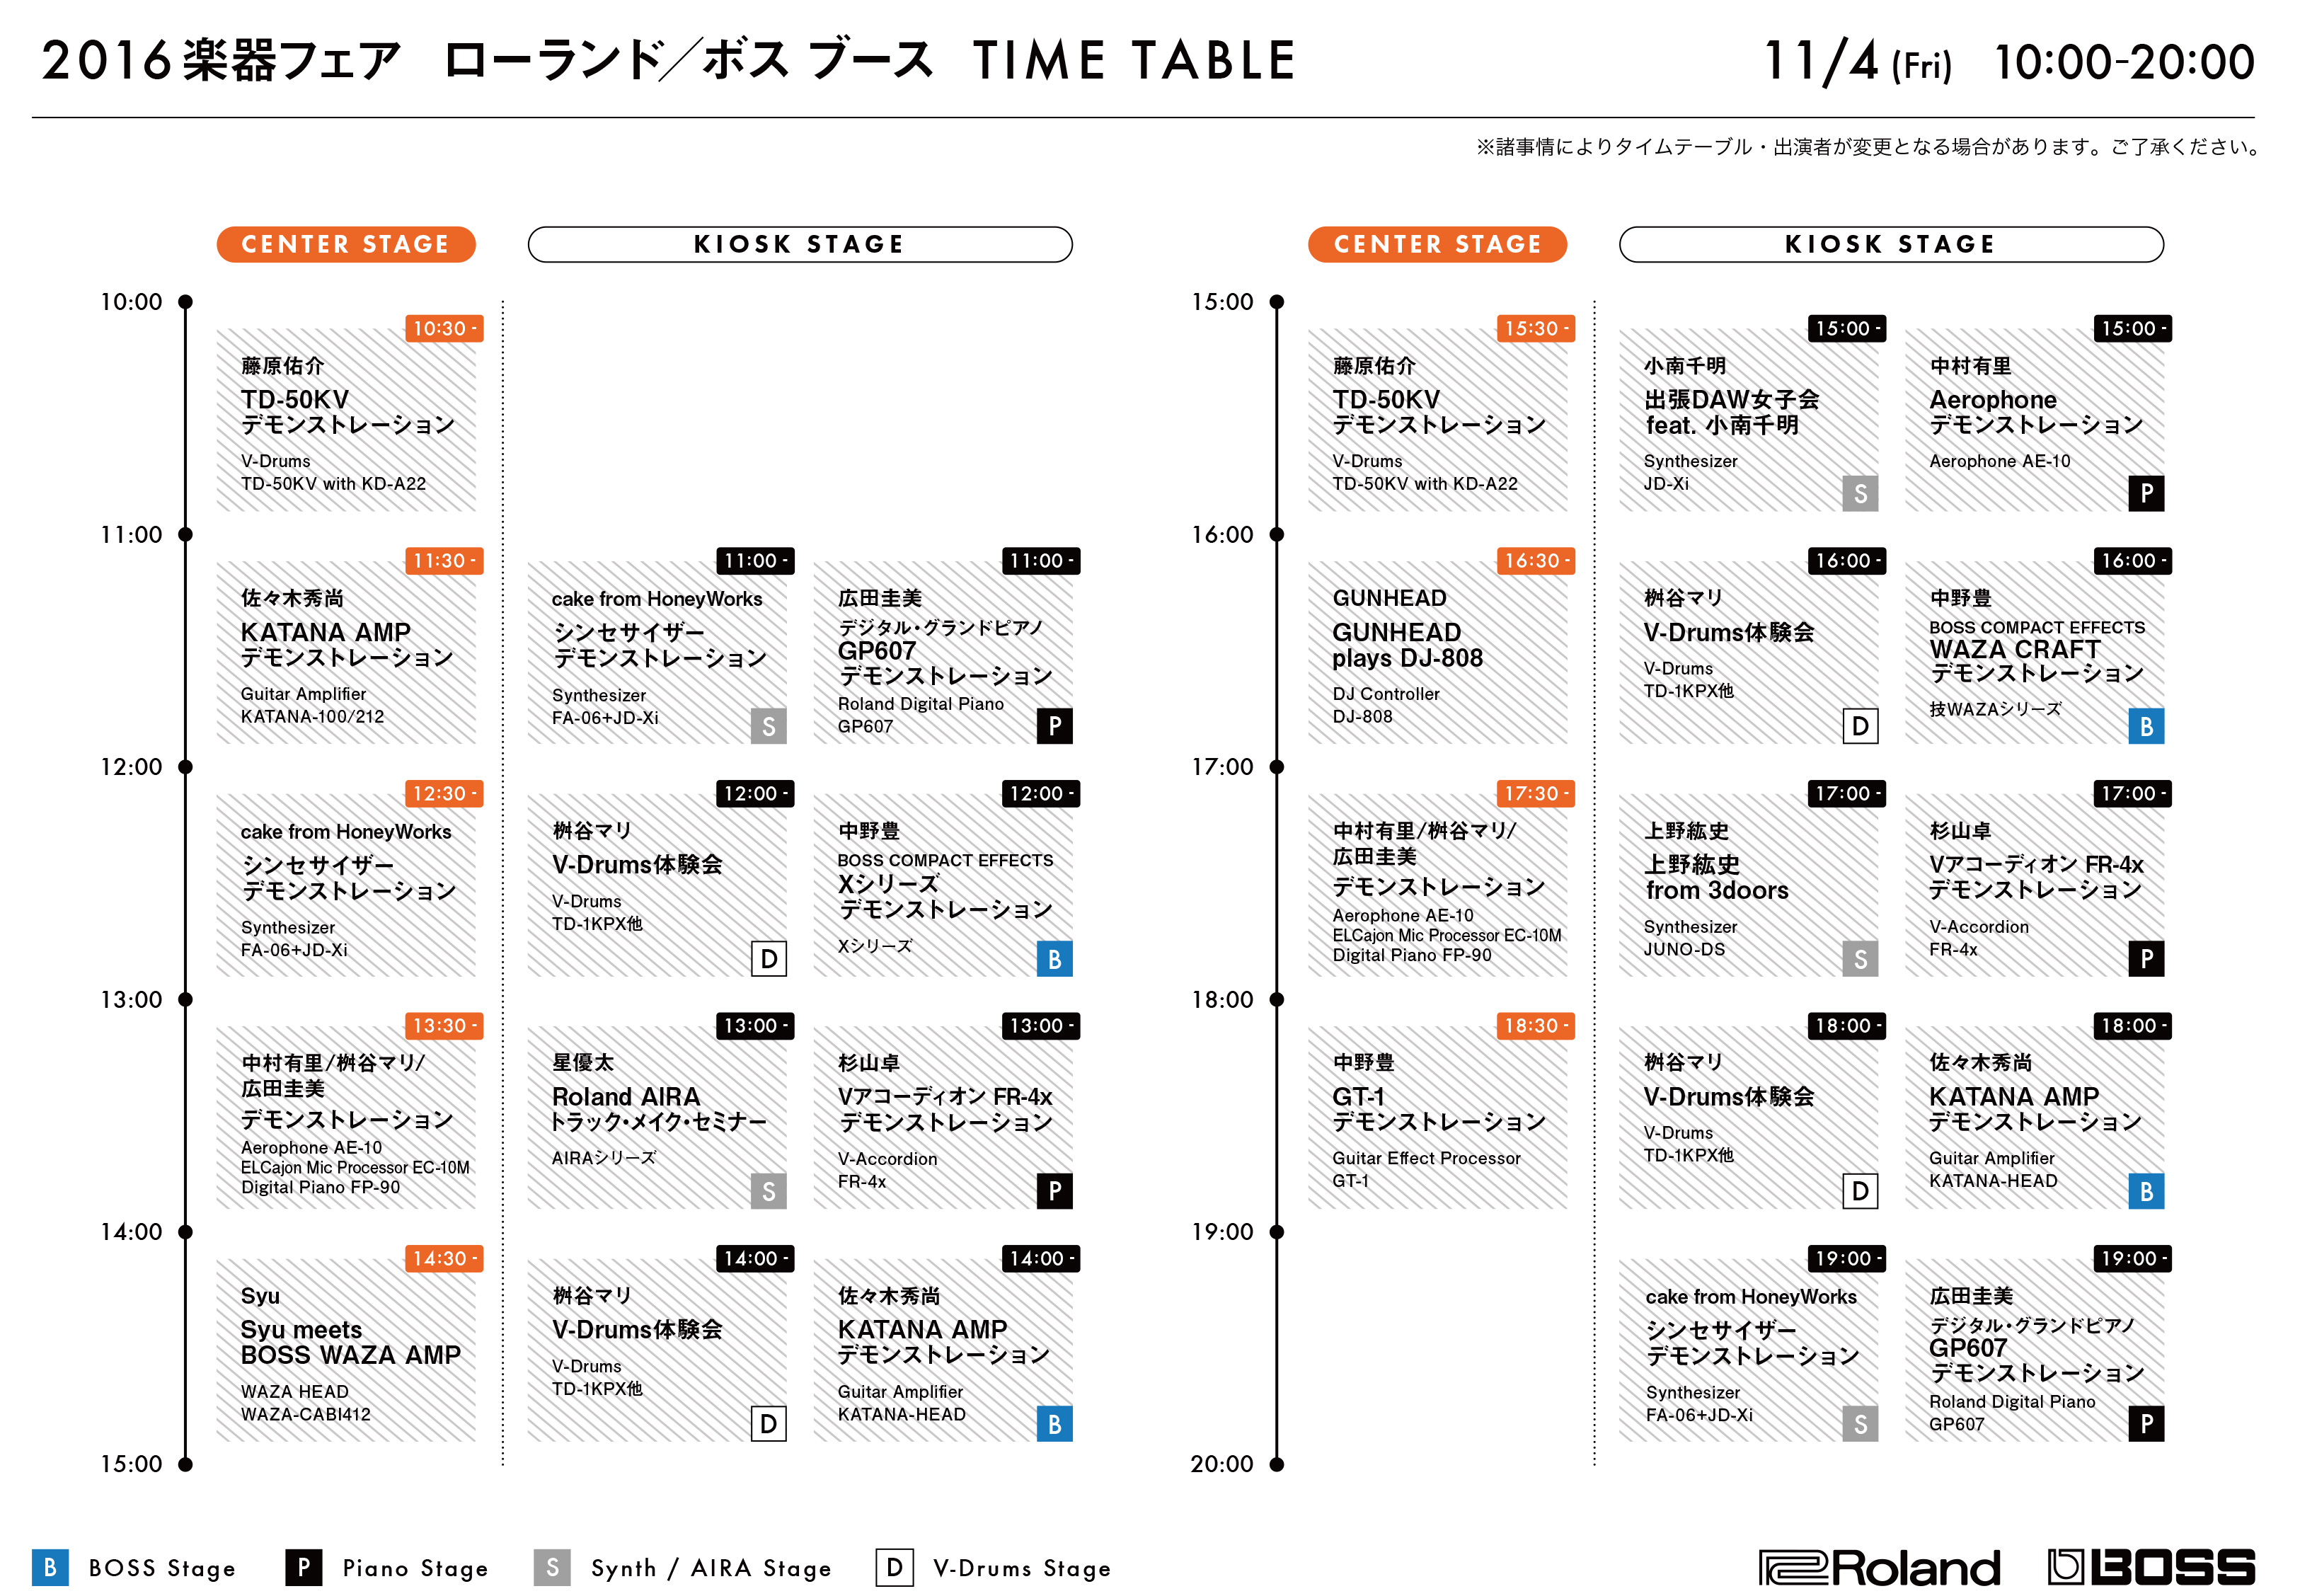 timetable_roland_boss_20161104